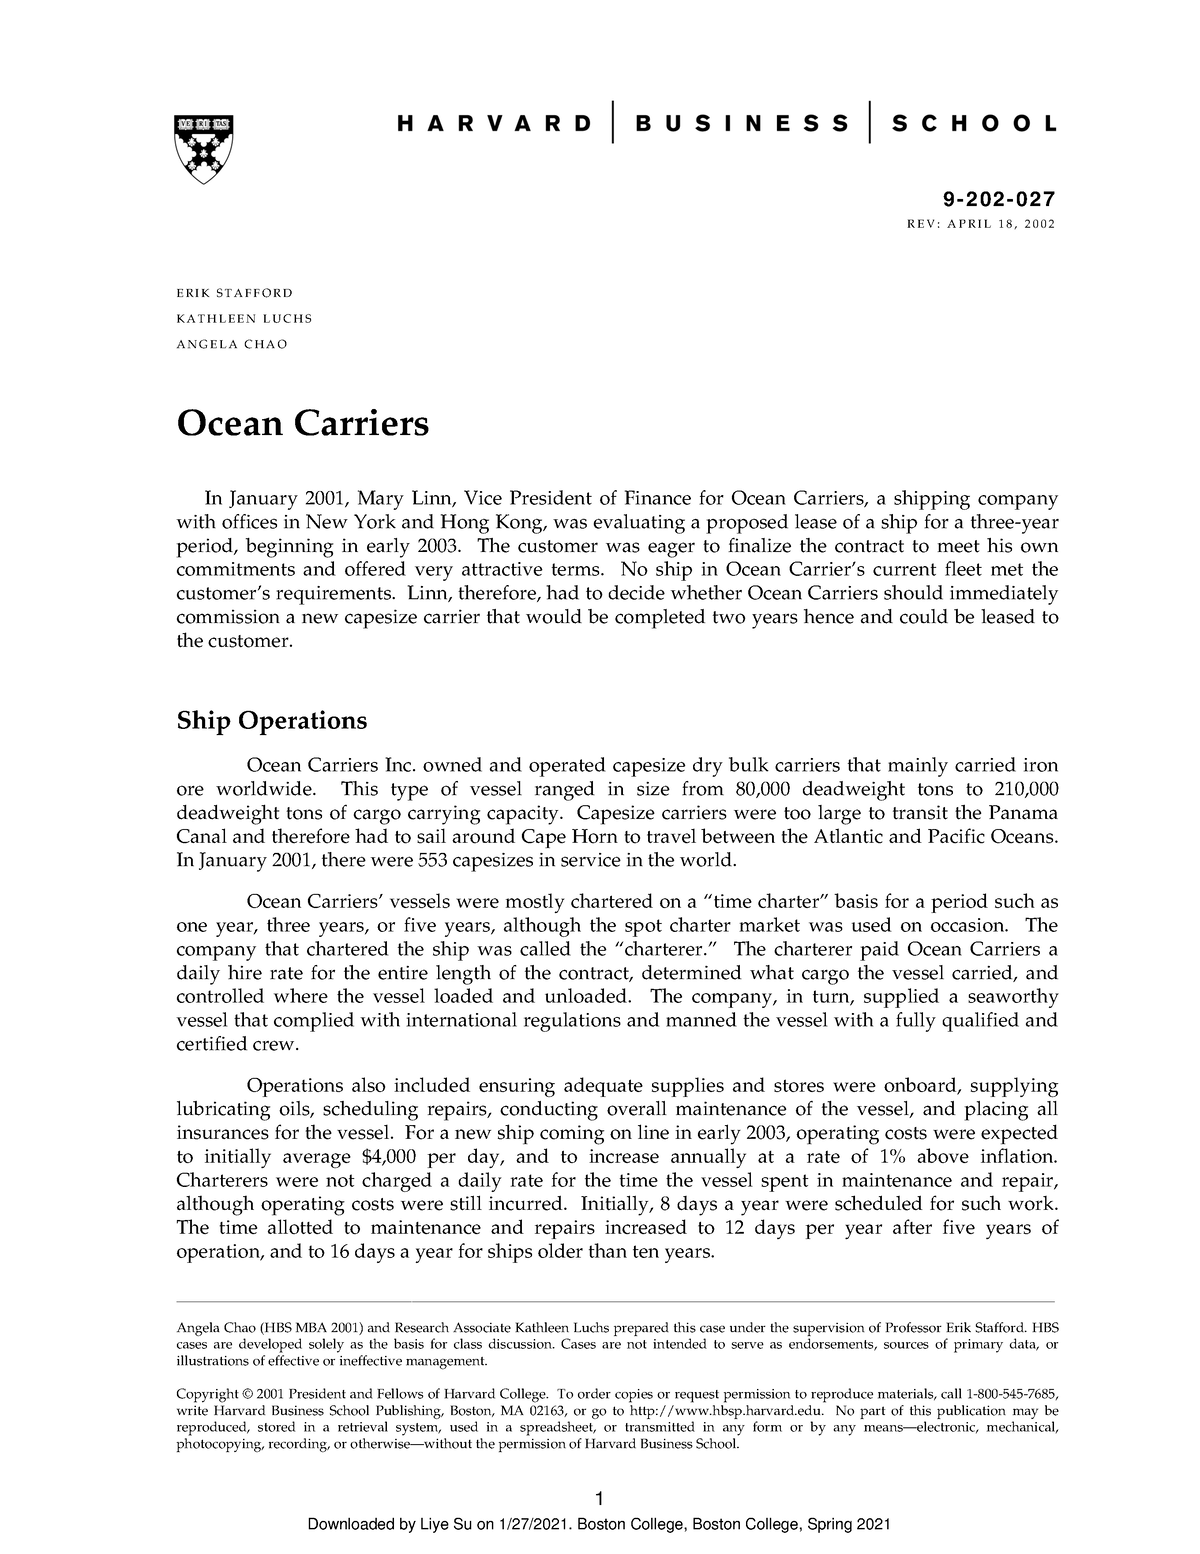 ocean carriers case study solution